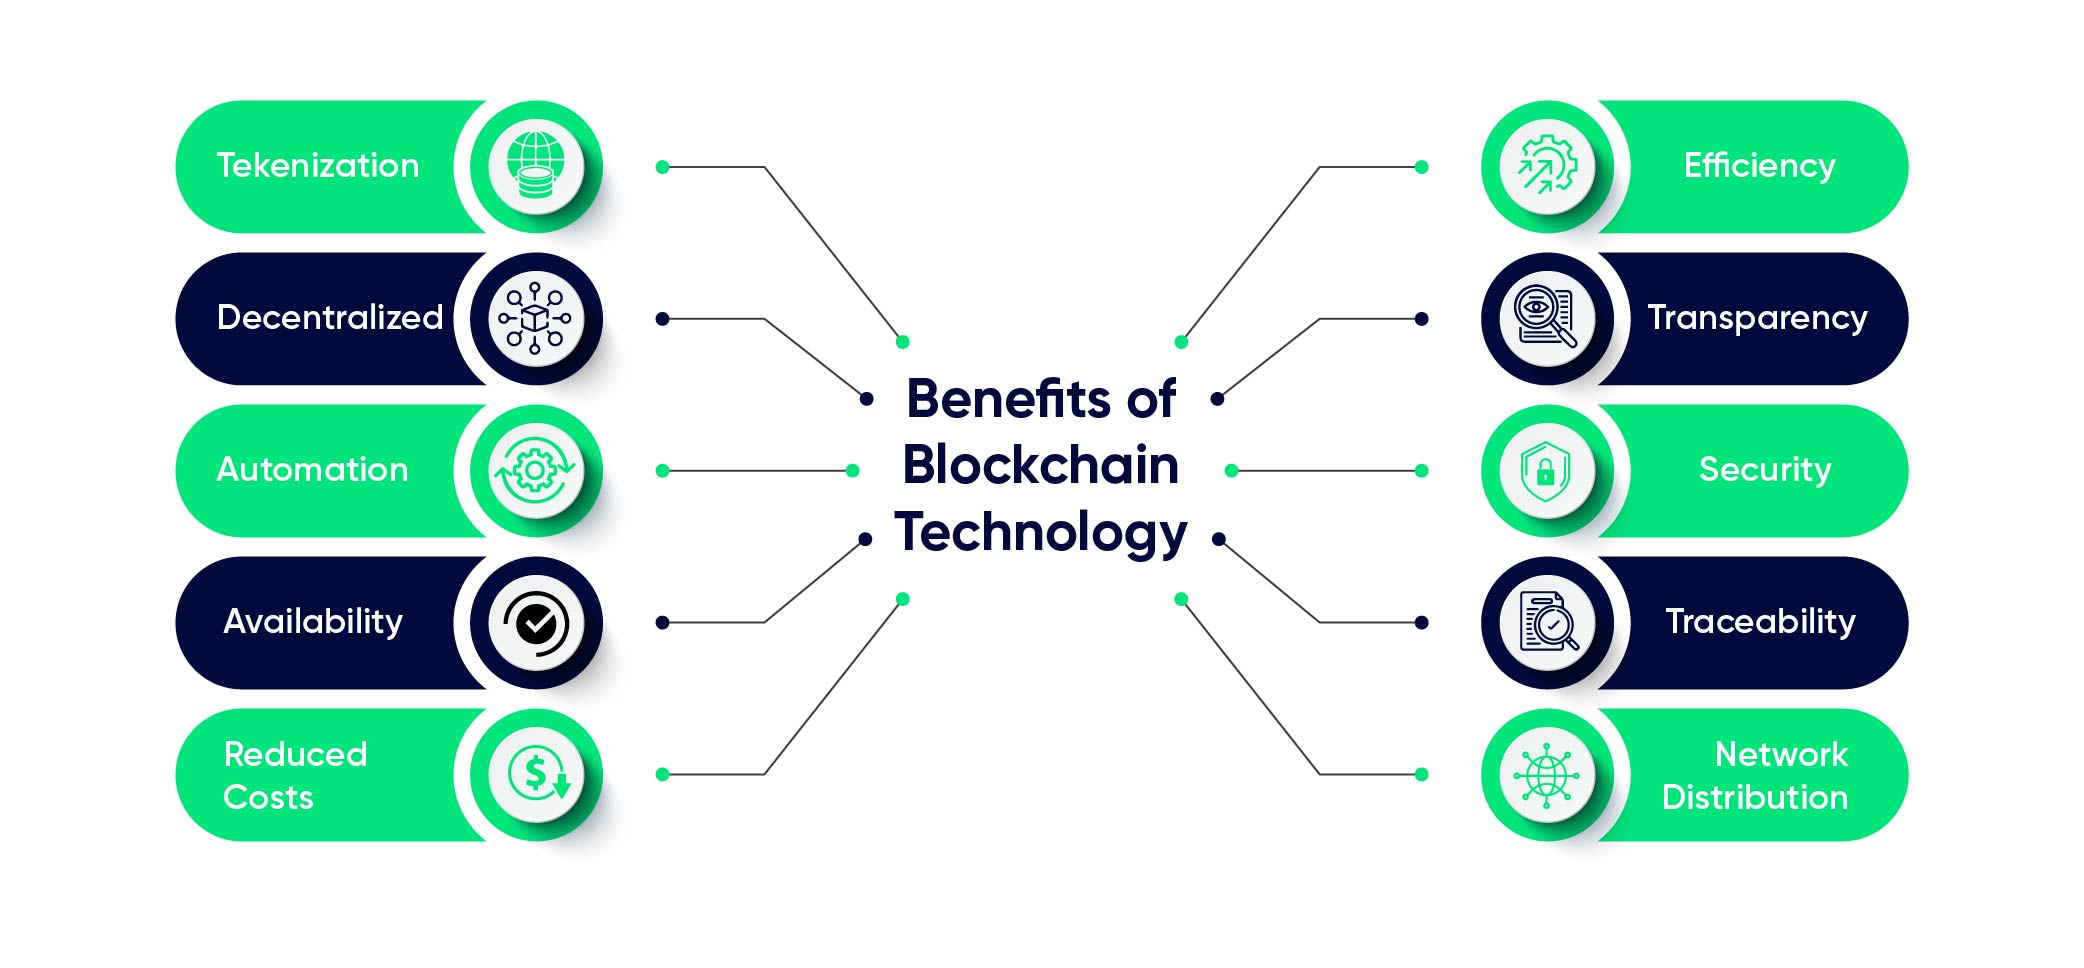 What is the Purpose of Blockchain Technology